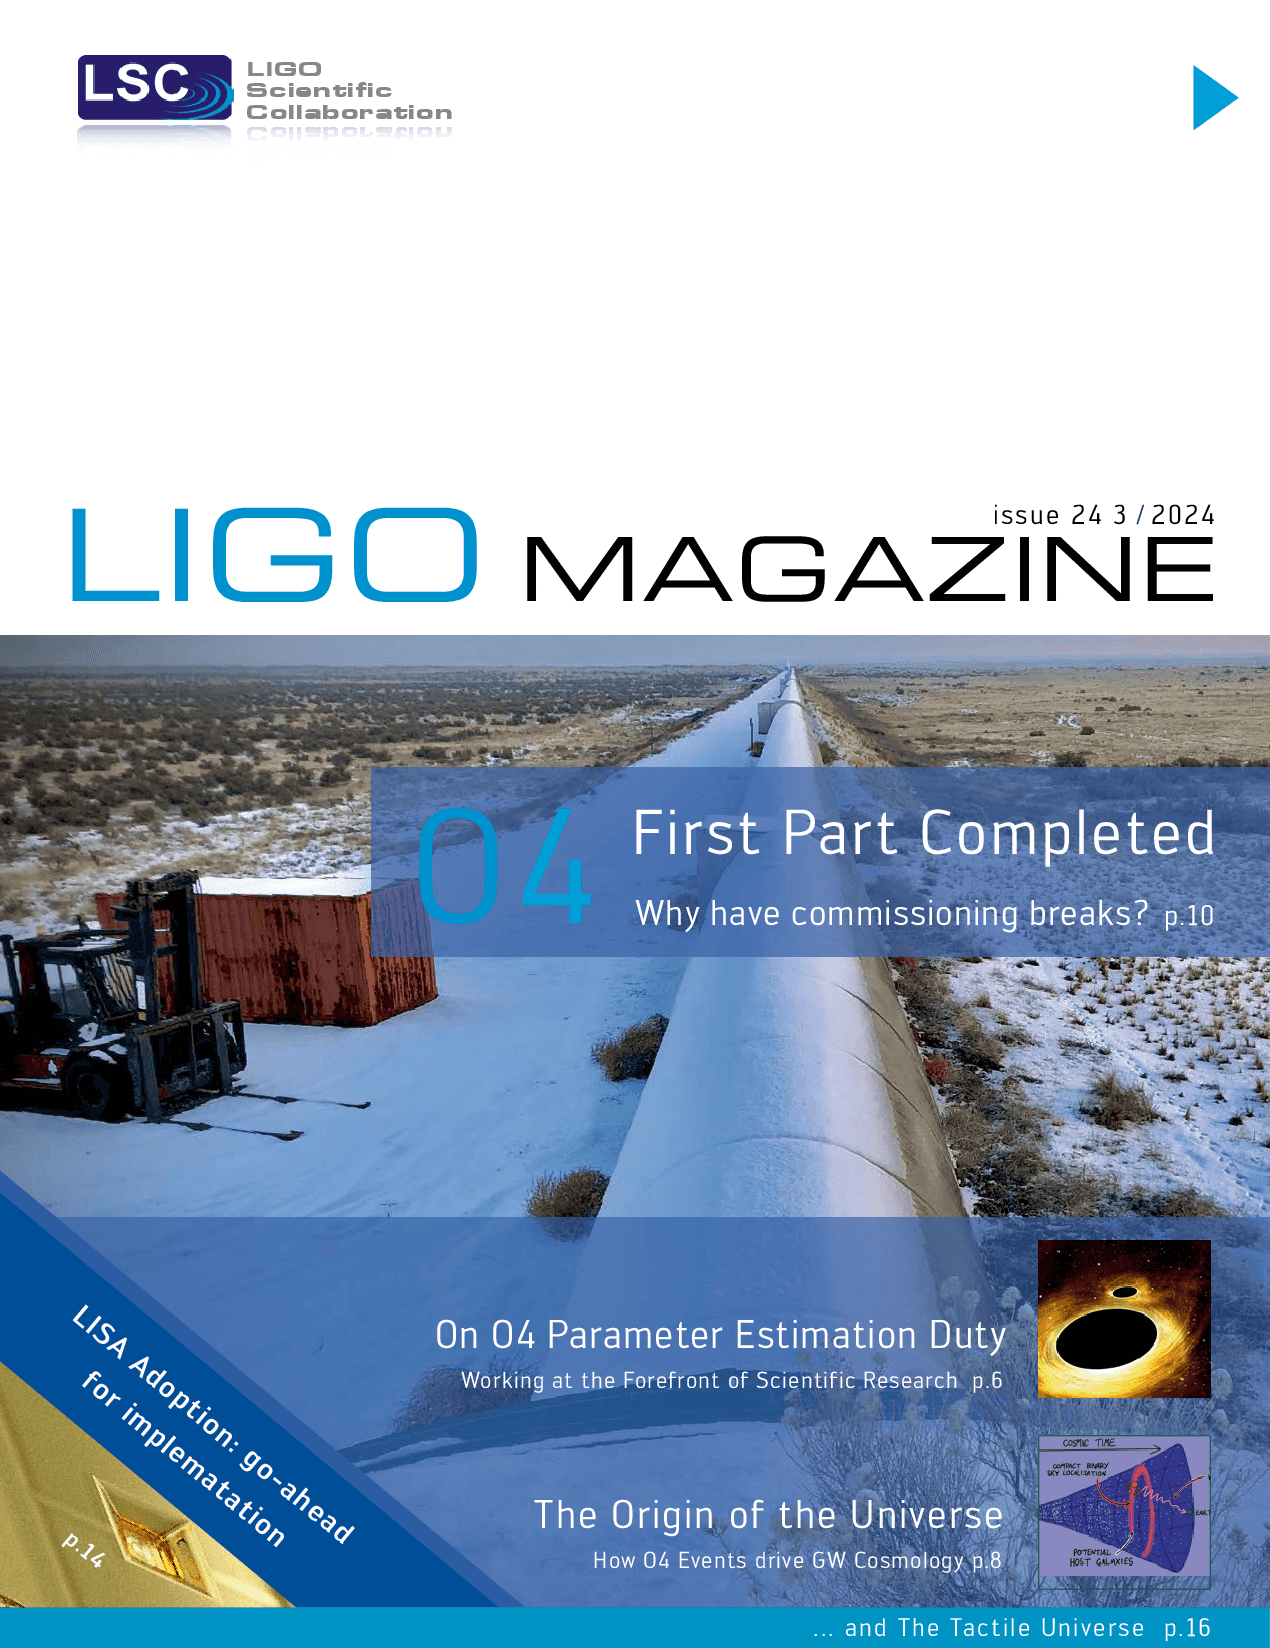 News-Image 4 of: New LIGO Magazine Issue 24 is out!